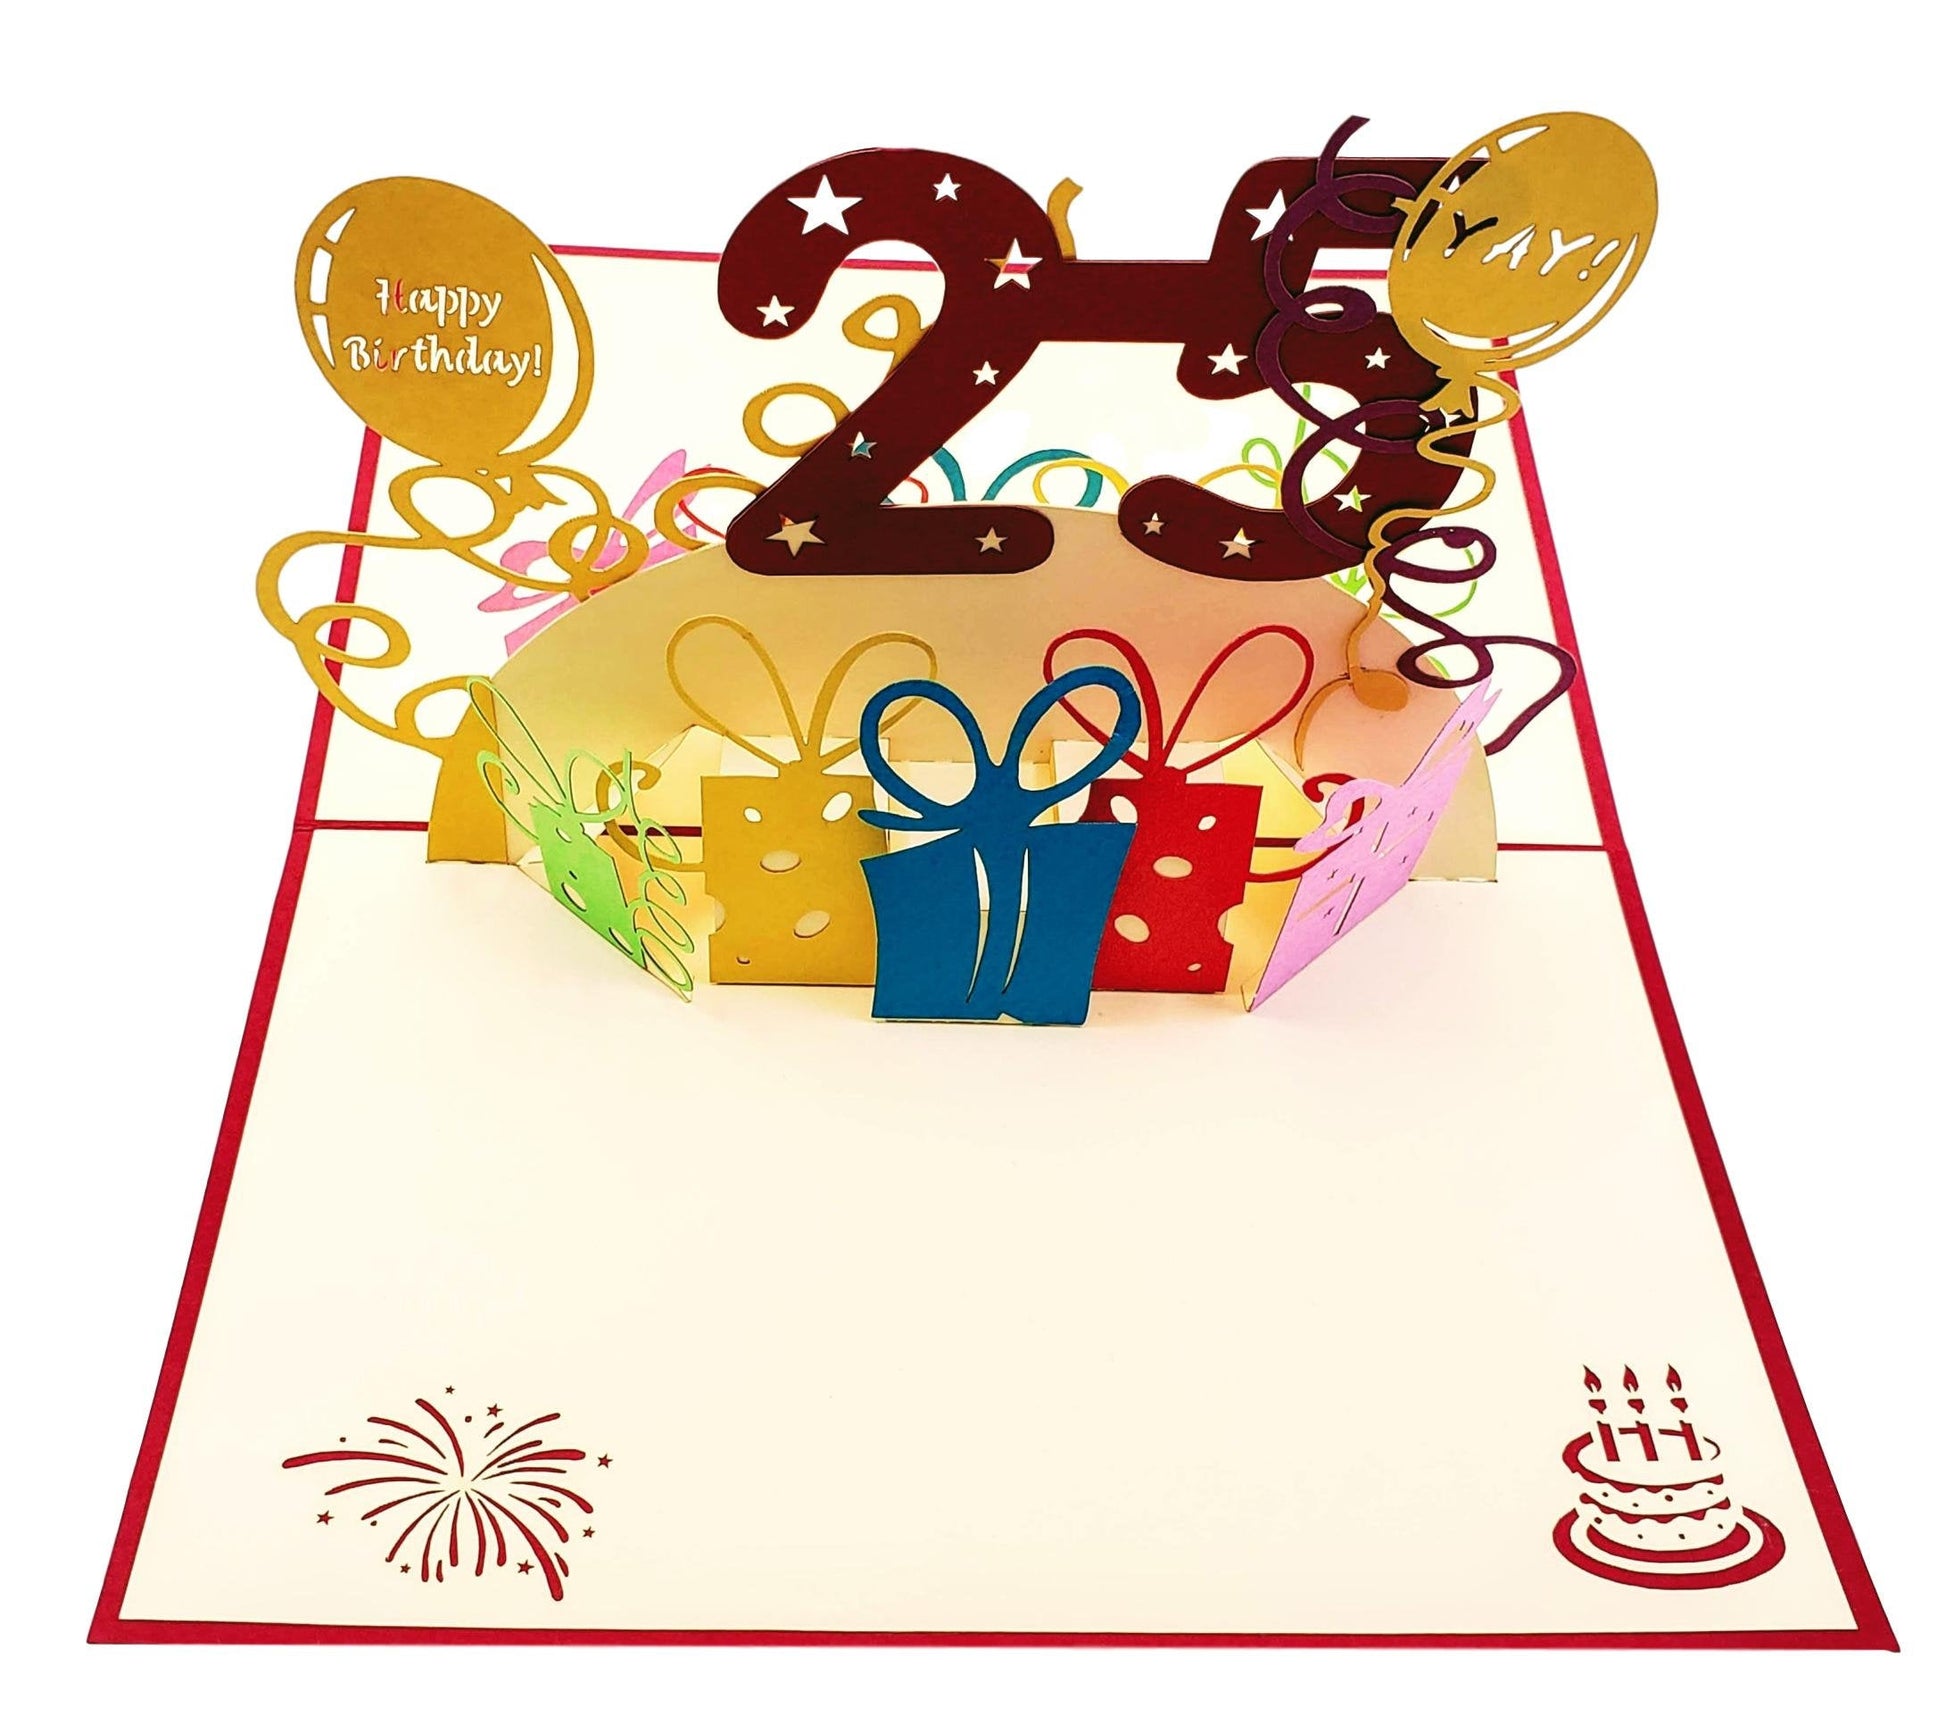 Happy 25th Birthday With Lots of Presents 3D Pop Up Card - best deal - Birthday - iGifts And Cards